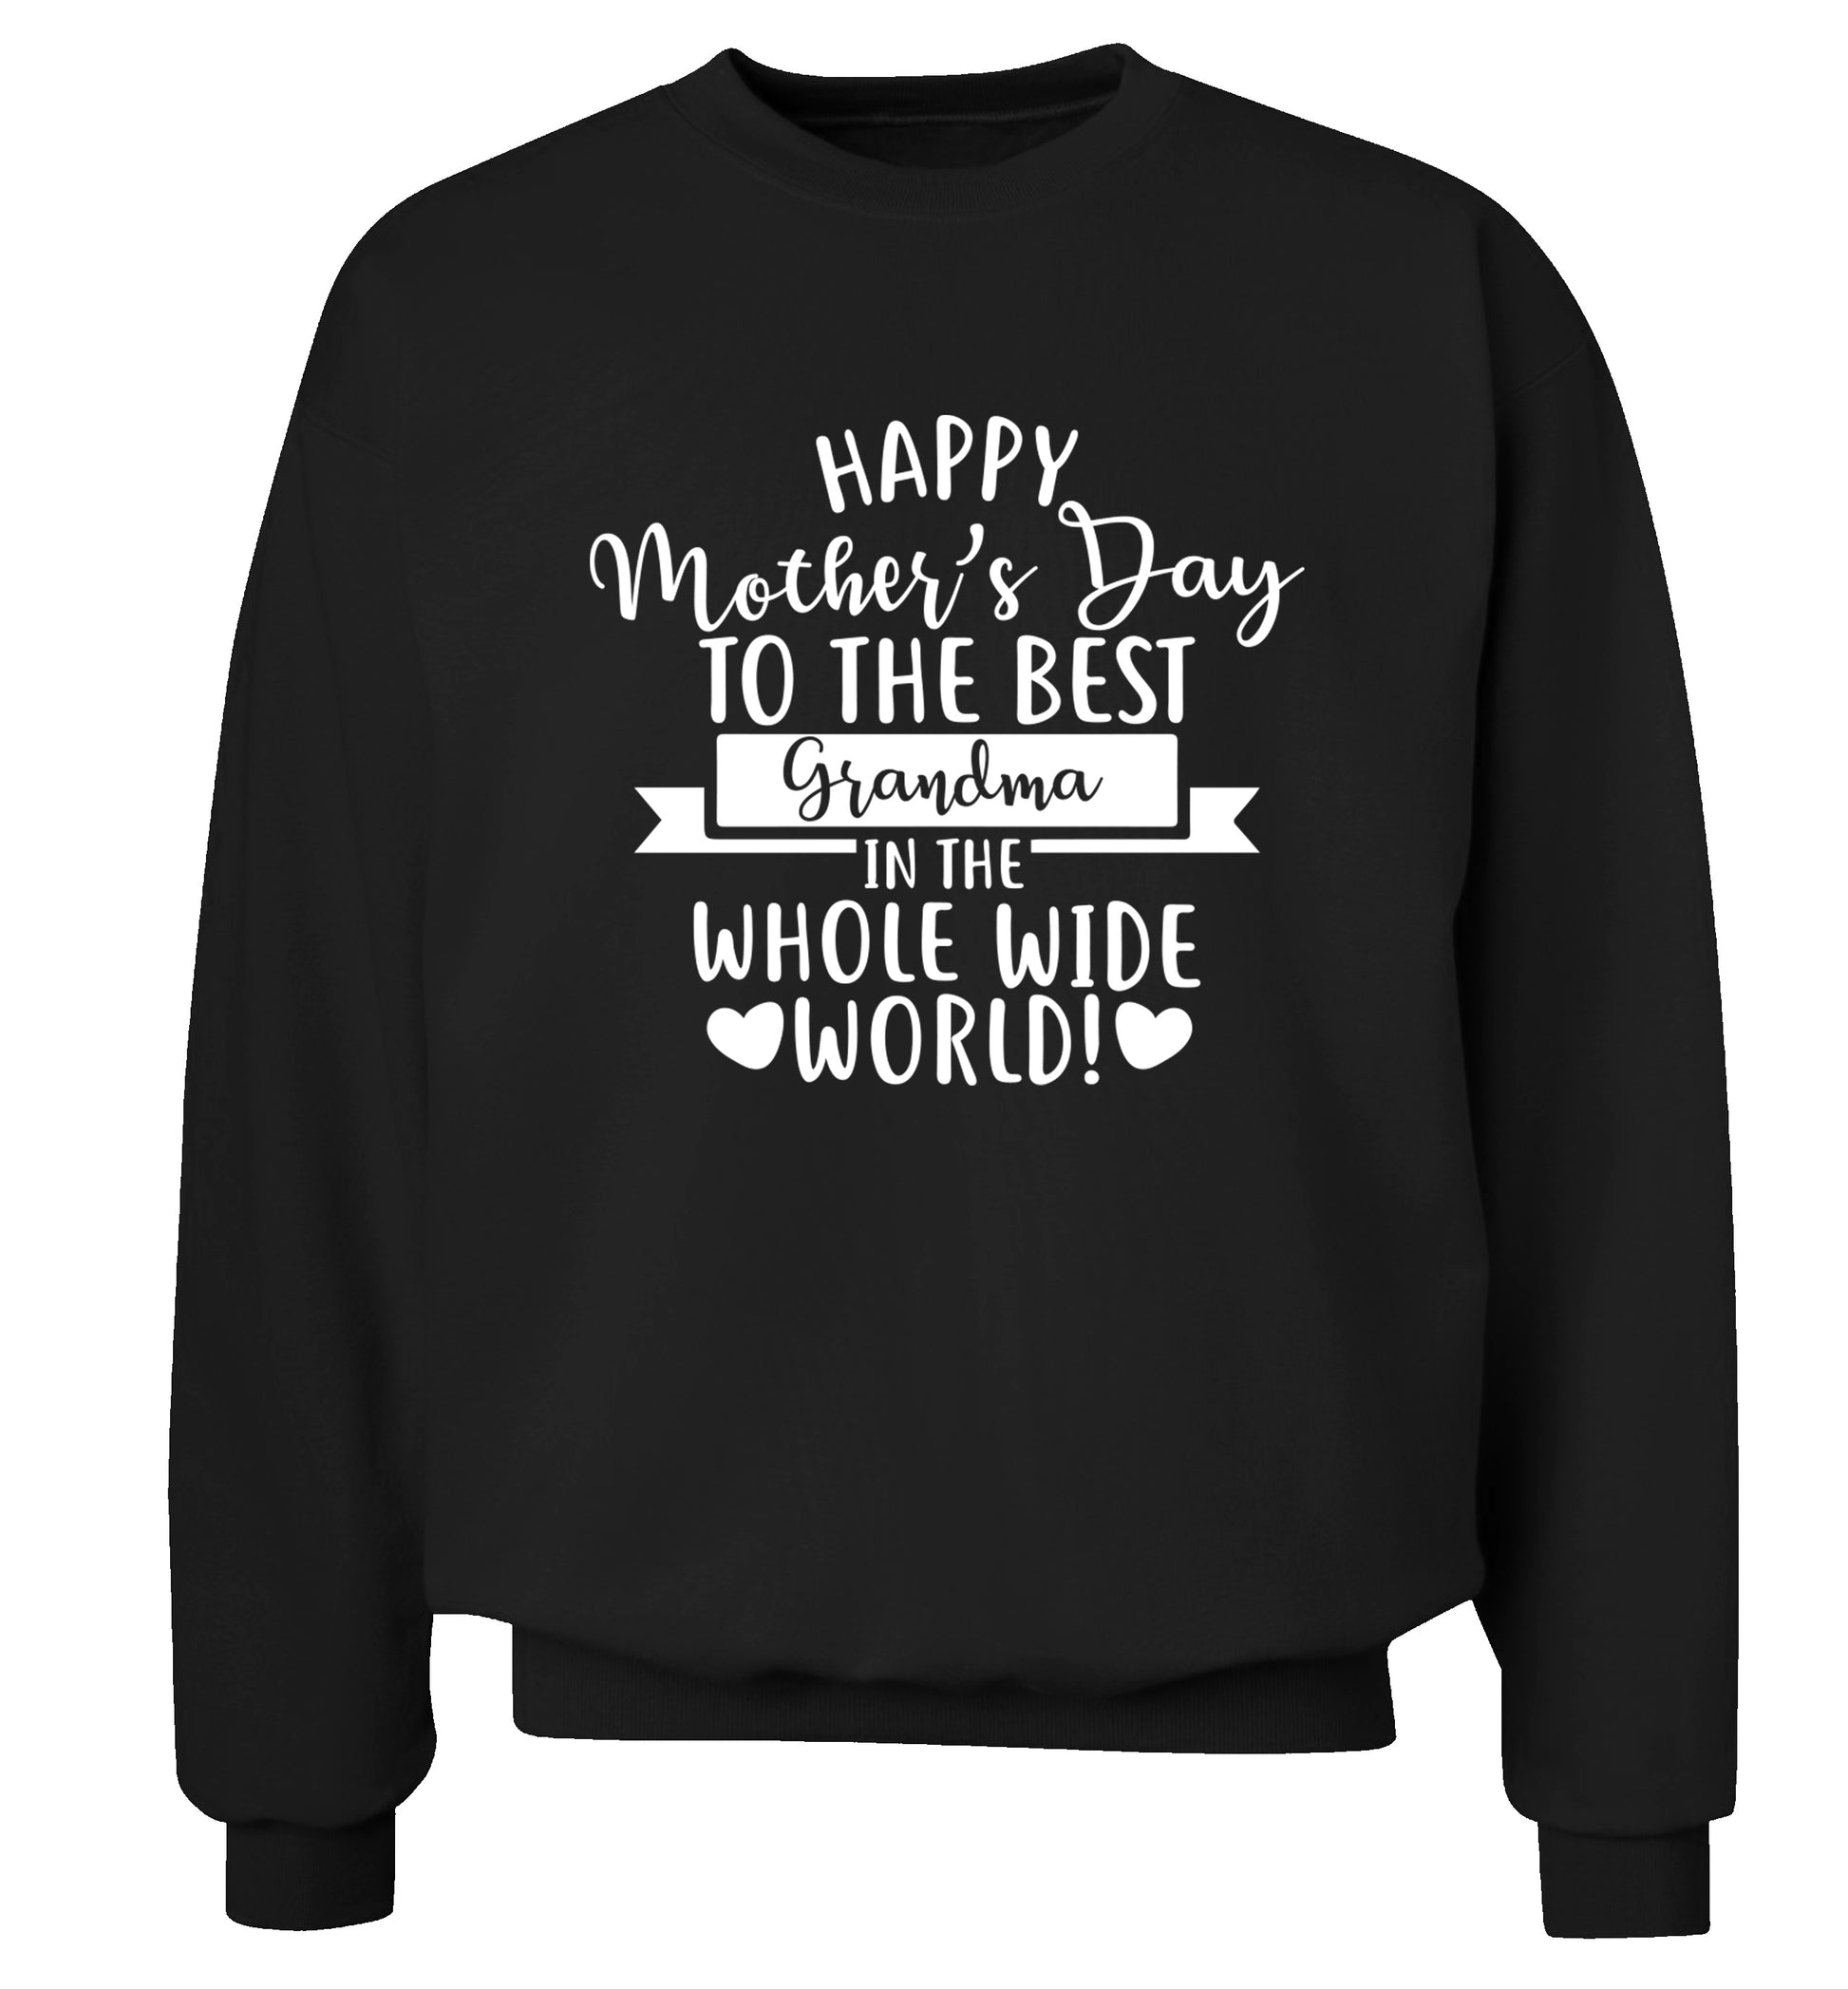 Happy mother's day to the best Grandma in the world Adult's unisex black Sweater 2XL